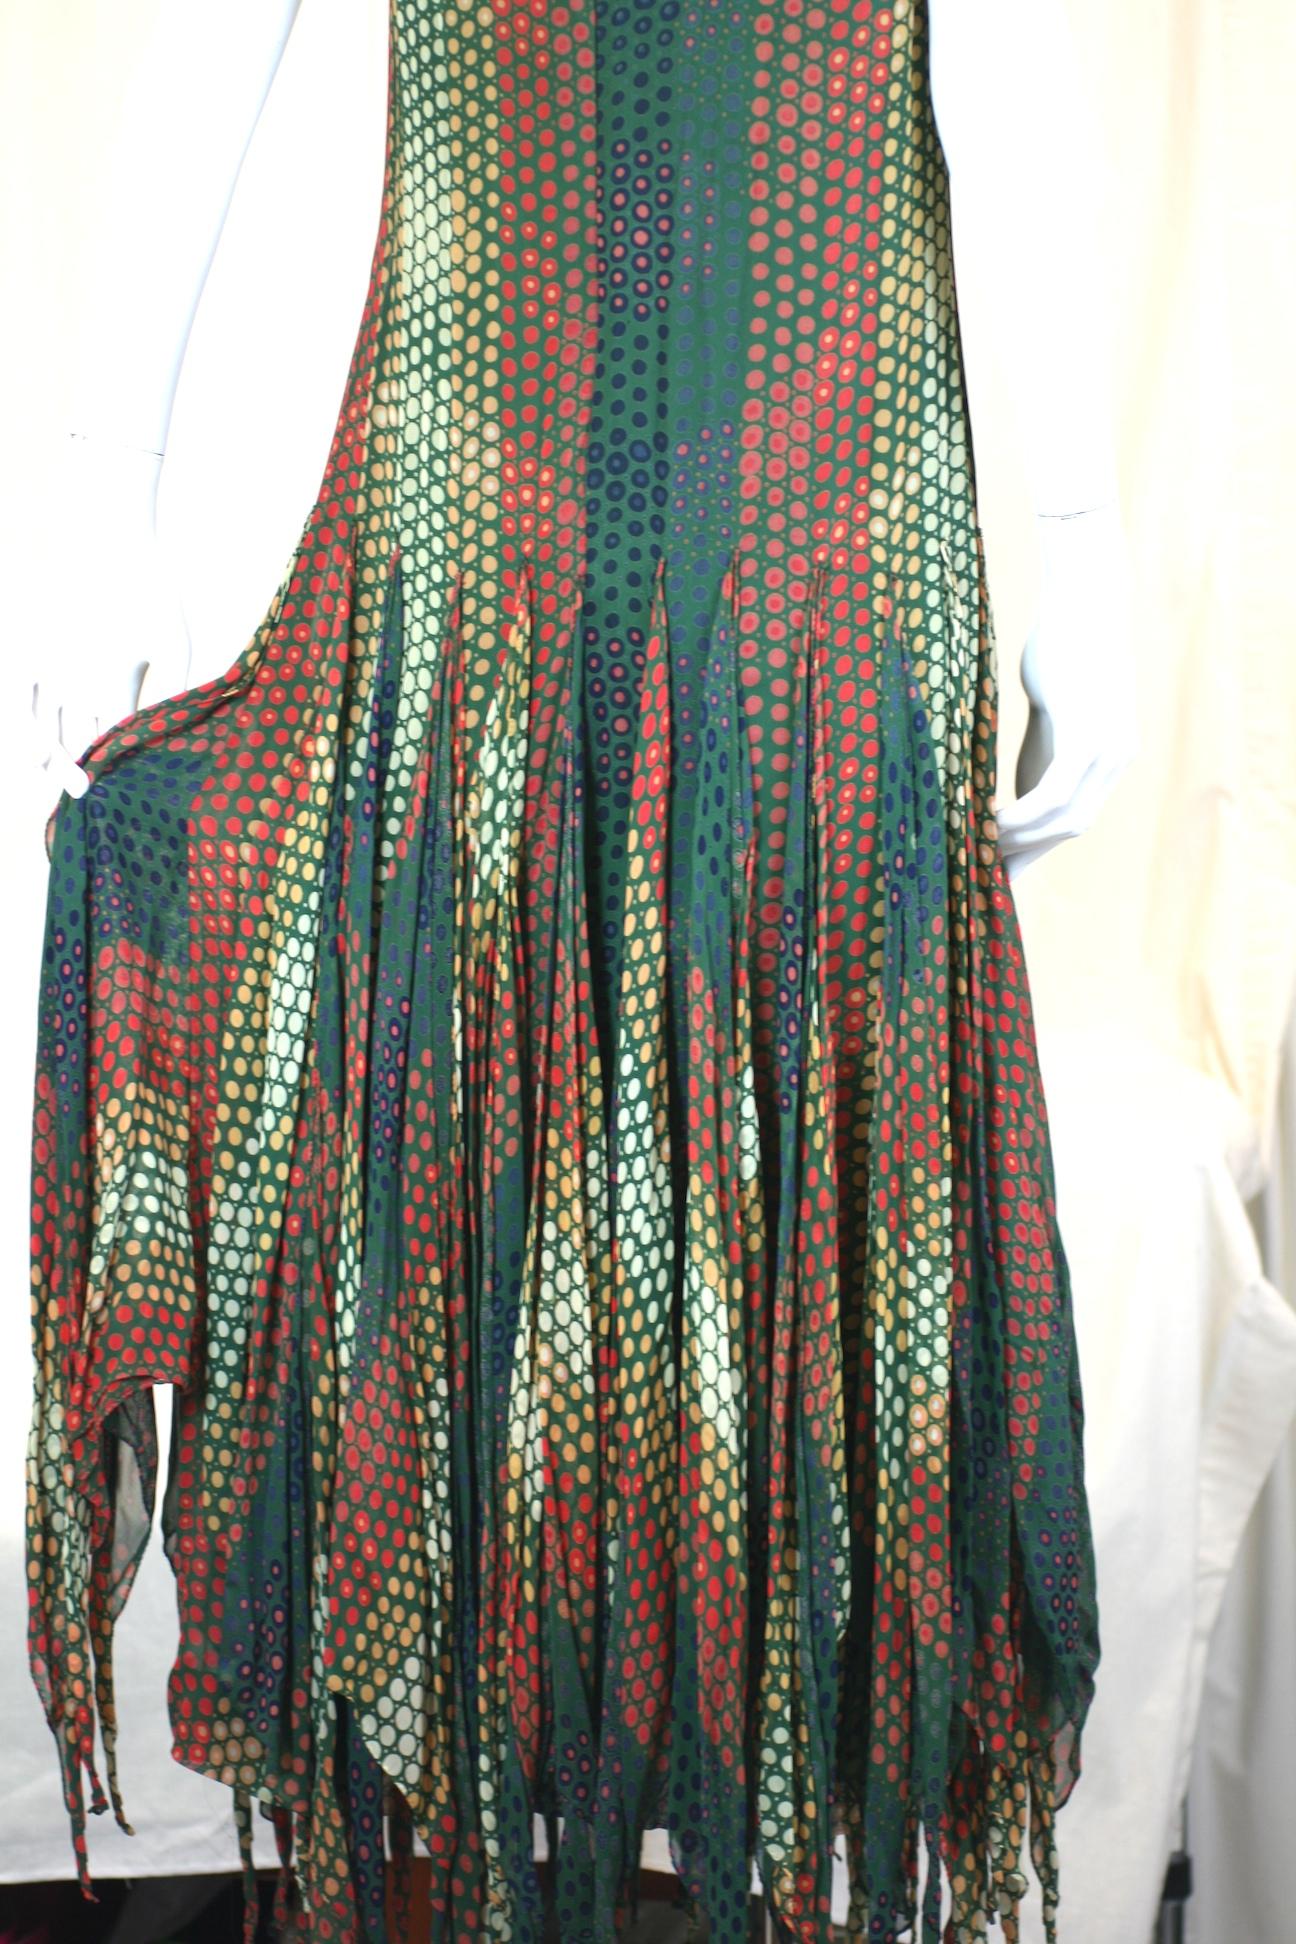 Pierre Cardin Op Art Scarf Hem Dress In Good Condition For Sale In New York, NY